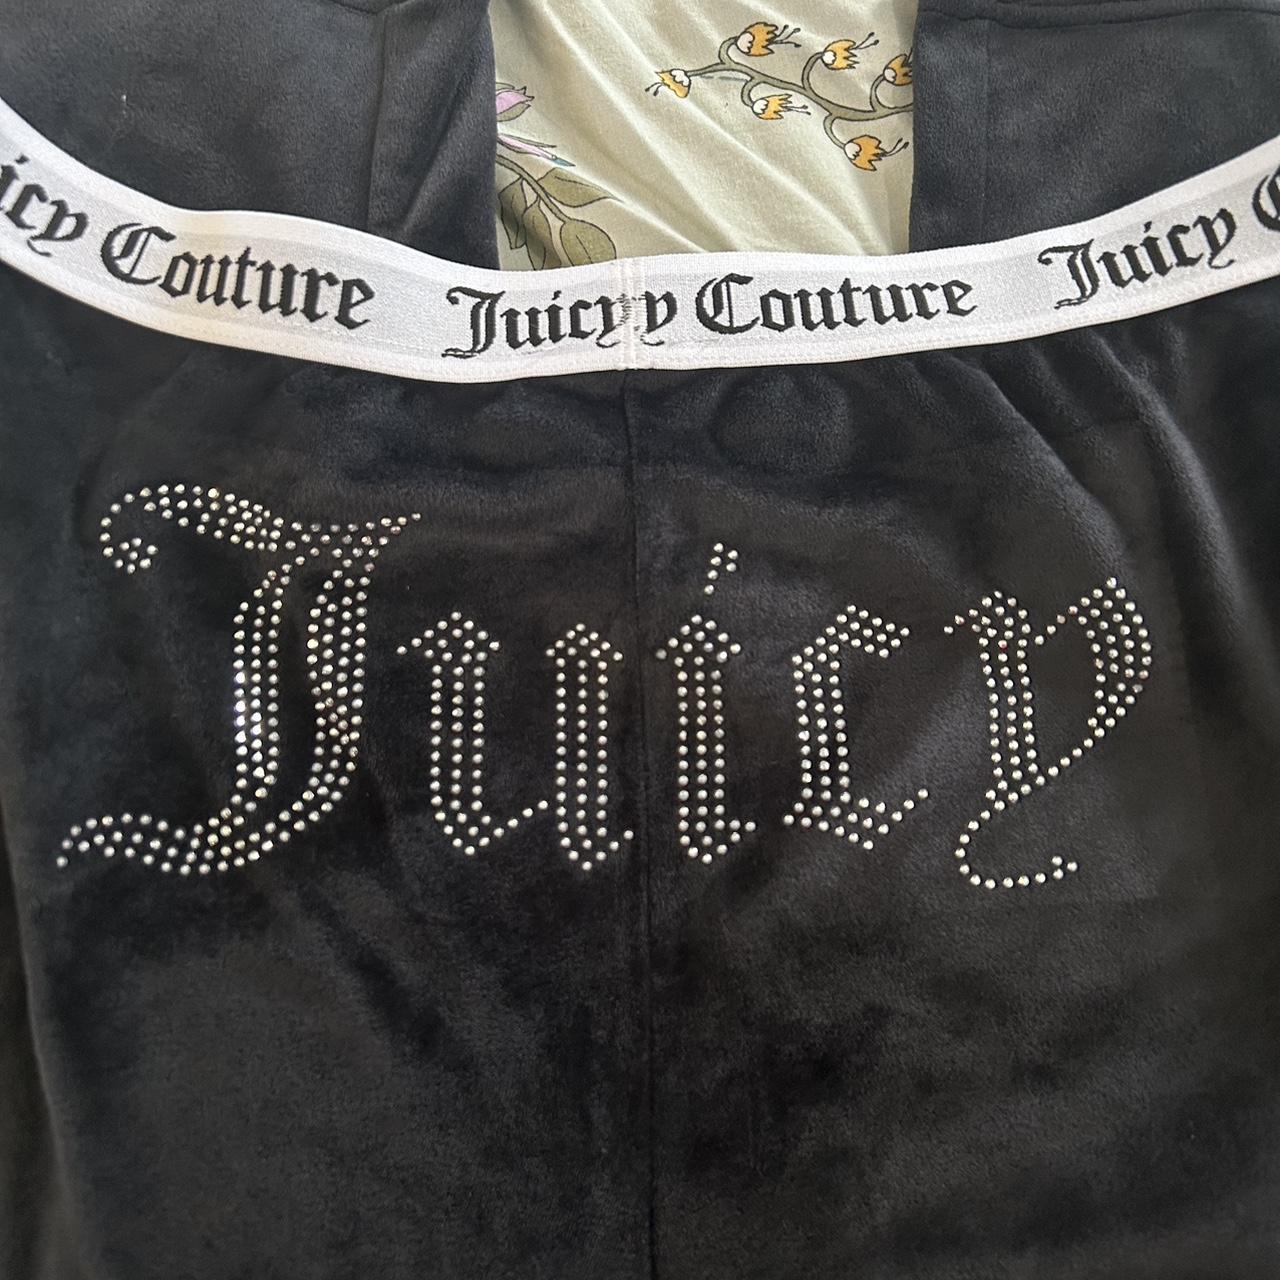 Juicy couture jeweled elastic waistband bottoms Size... - Depop